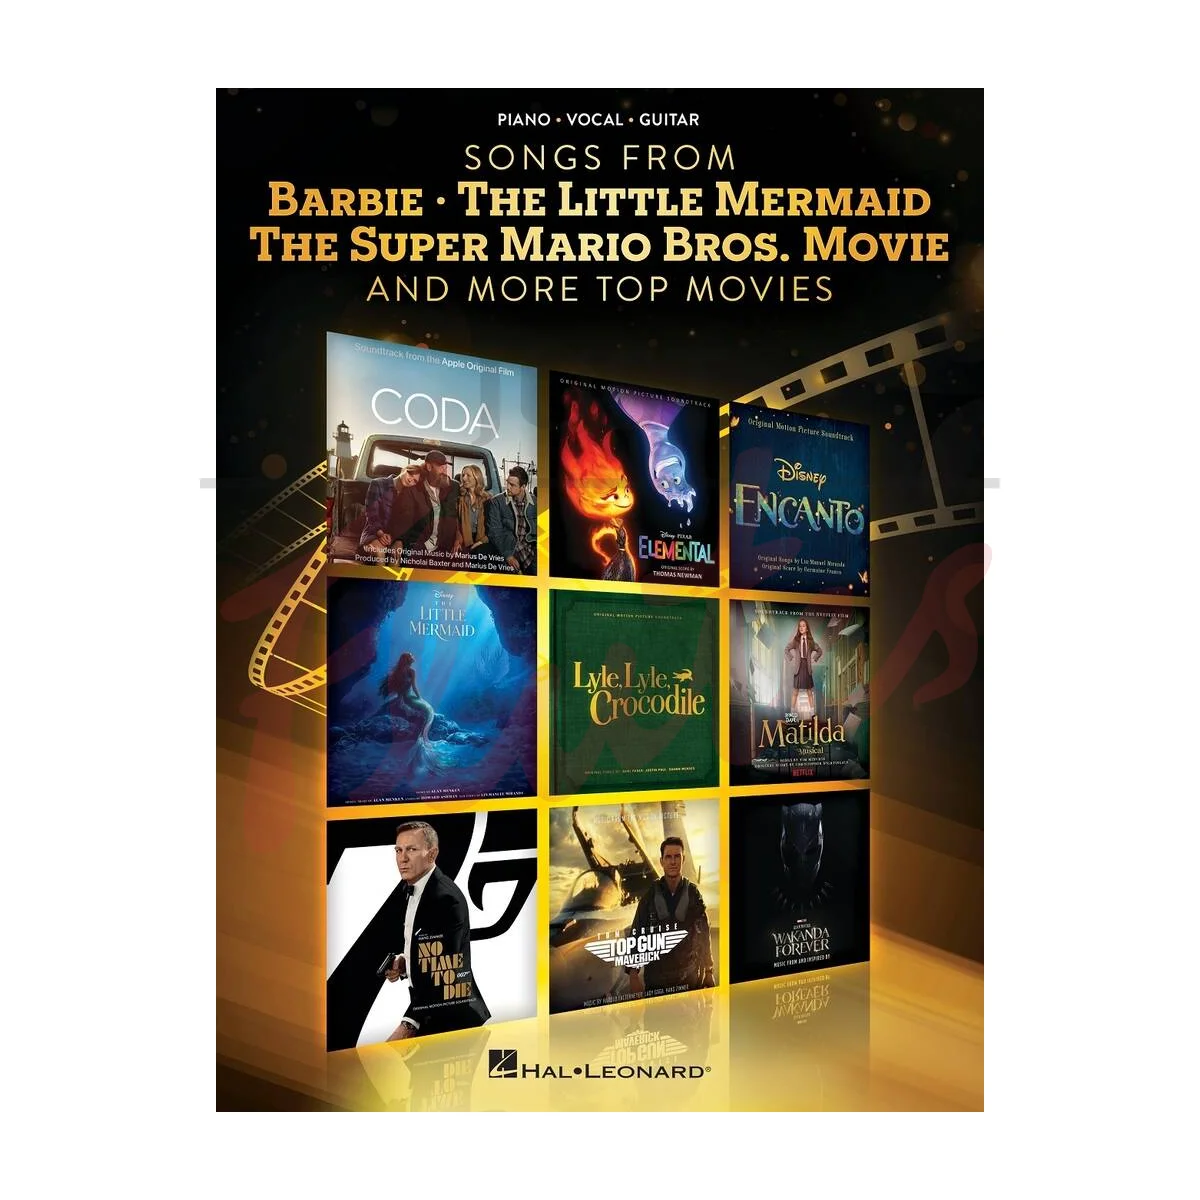 Songs from Barbie, The Little Mermaid, The Super Mario Bros. Movie and More Top Movies for Piano, Vocal and Guitar